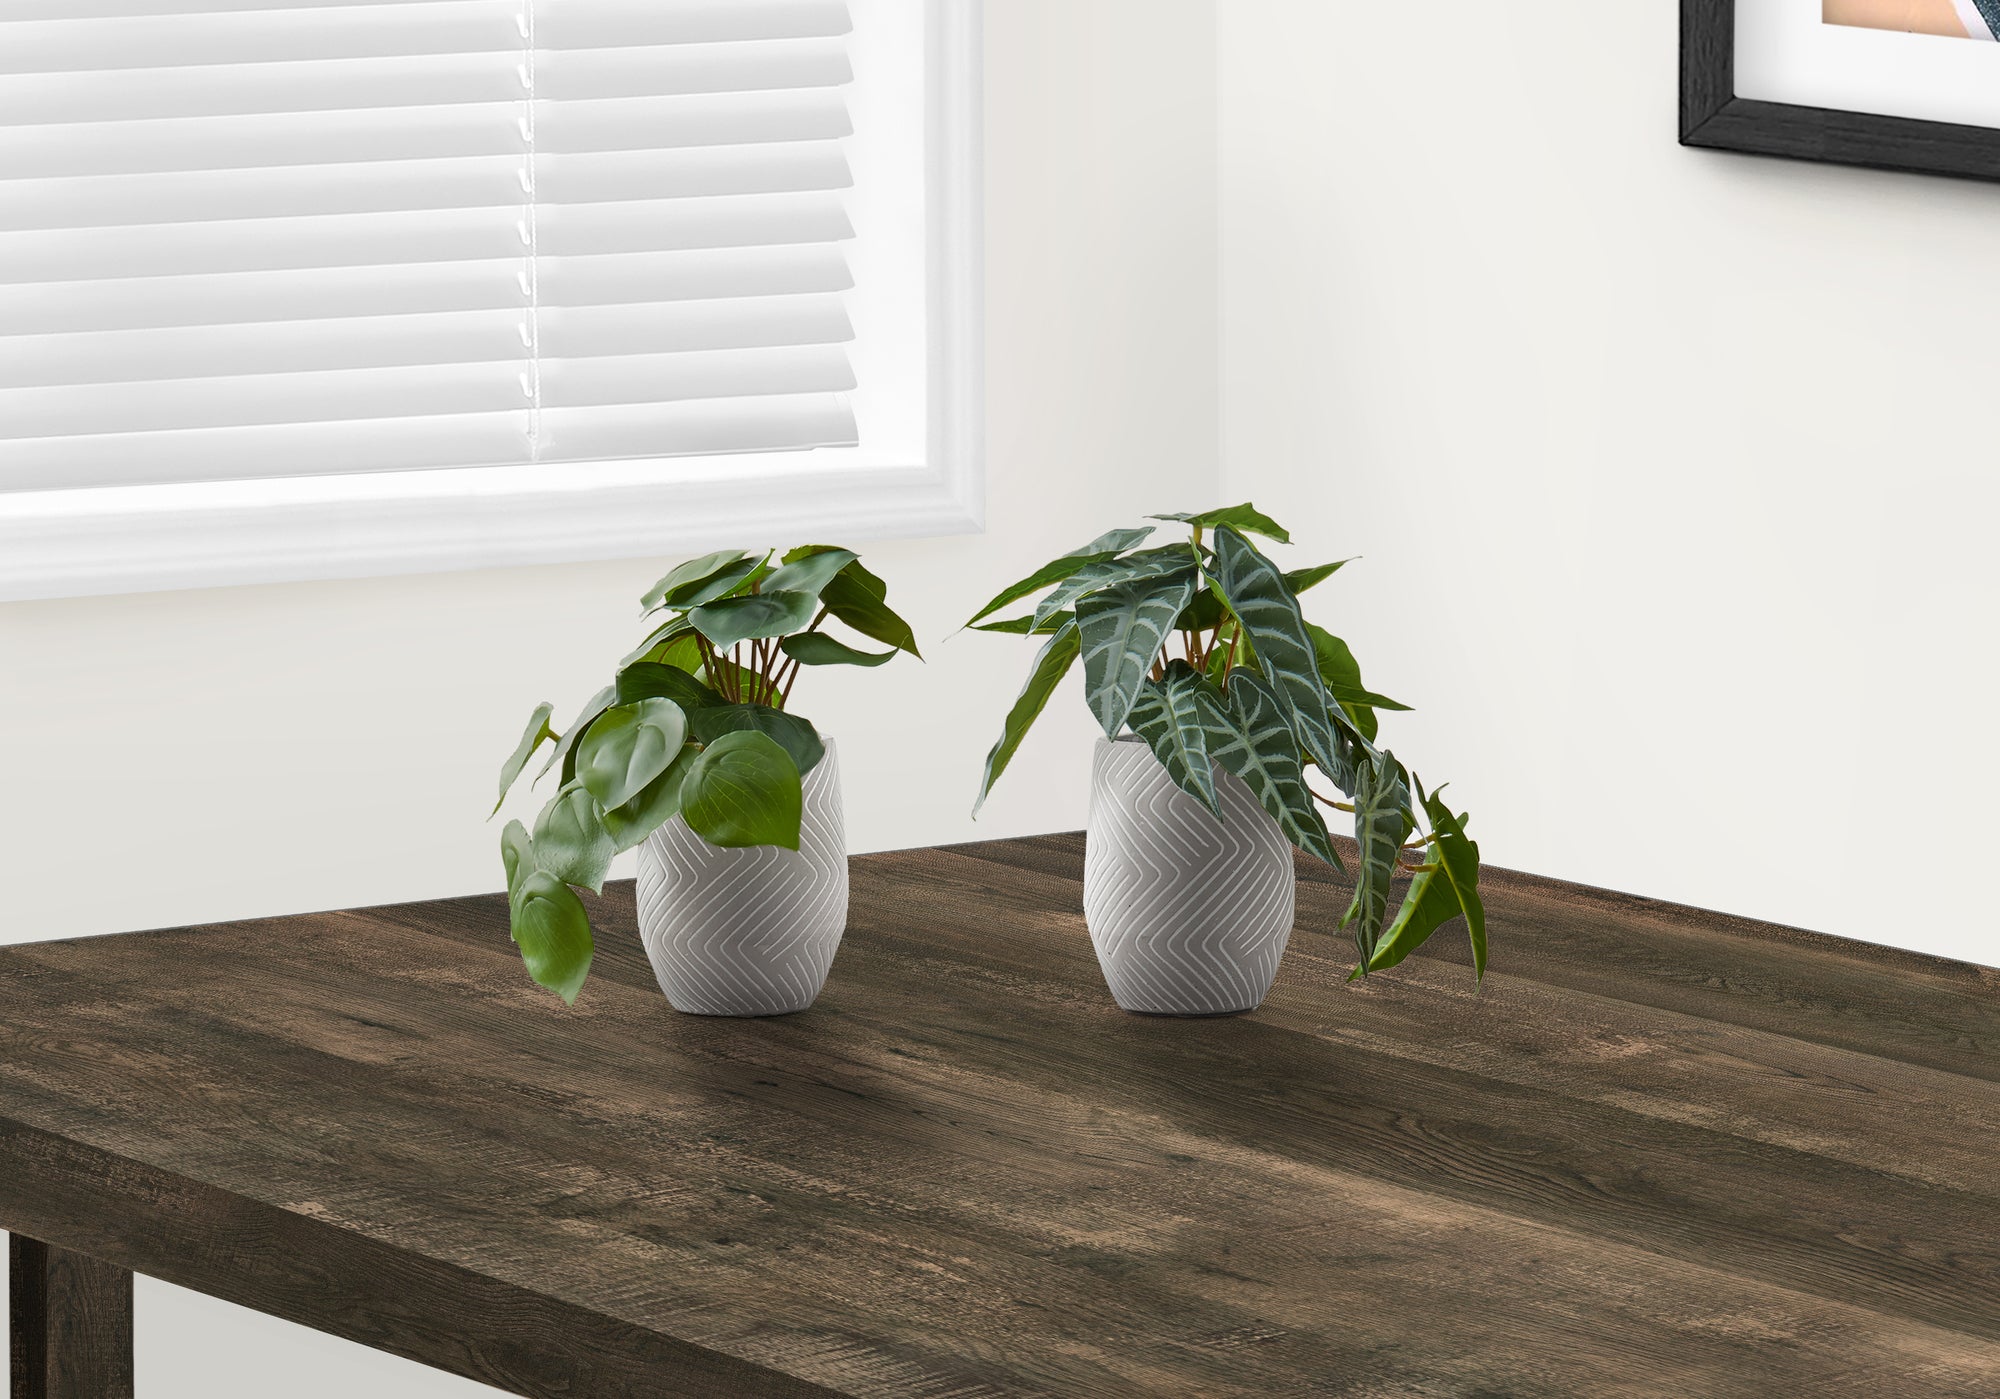 MN-729582    Artificial Plant, 8" Tall, Alocasia, Indoor, Faux, Fake, Table, Greenery, Potted, Set Of 2, Decorative, Green Leaves, White Cement Pots